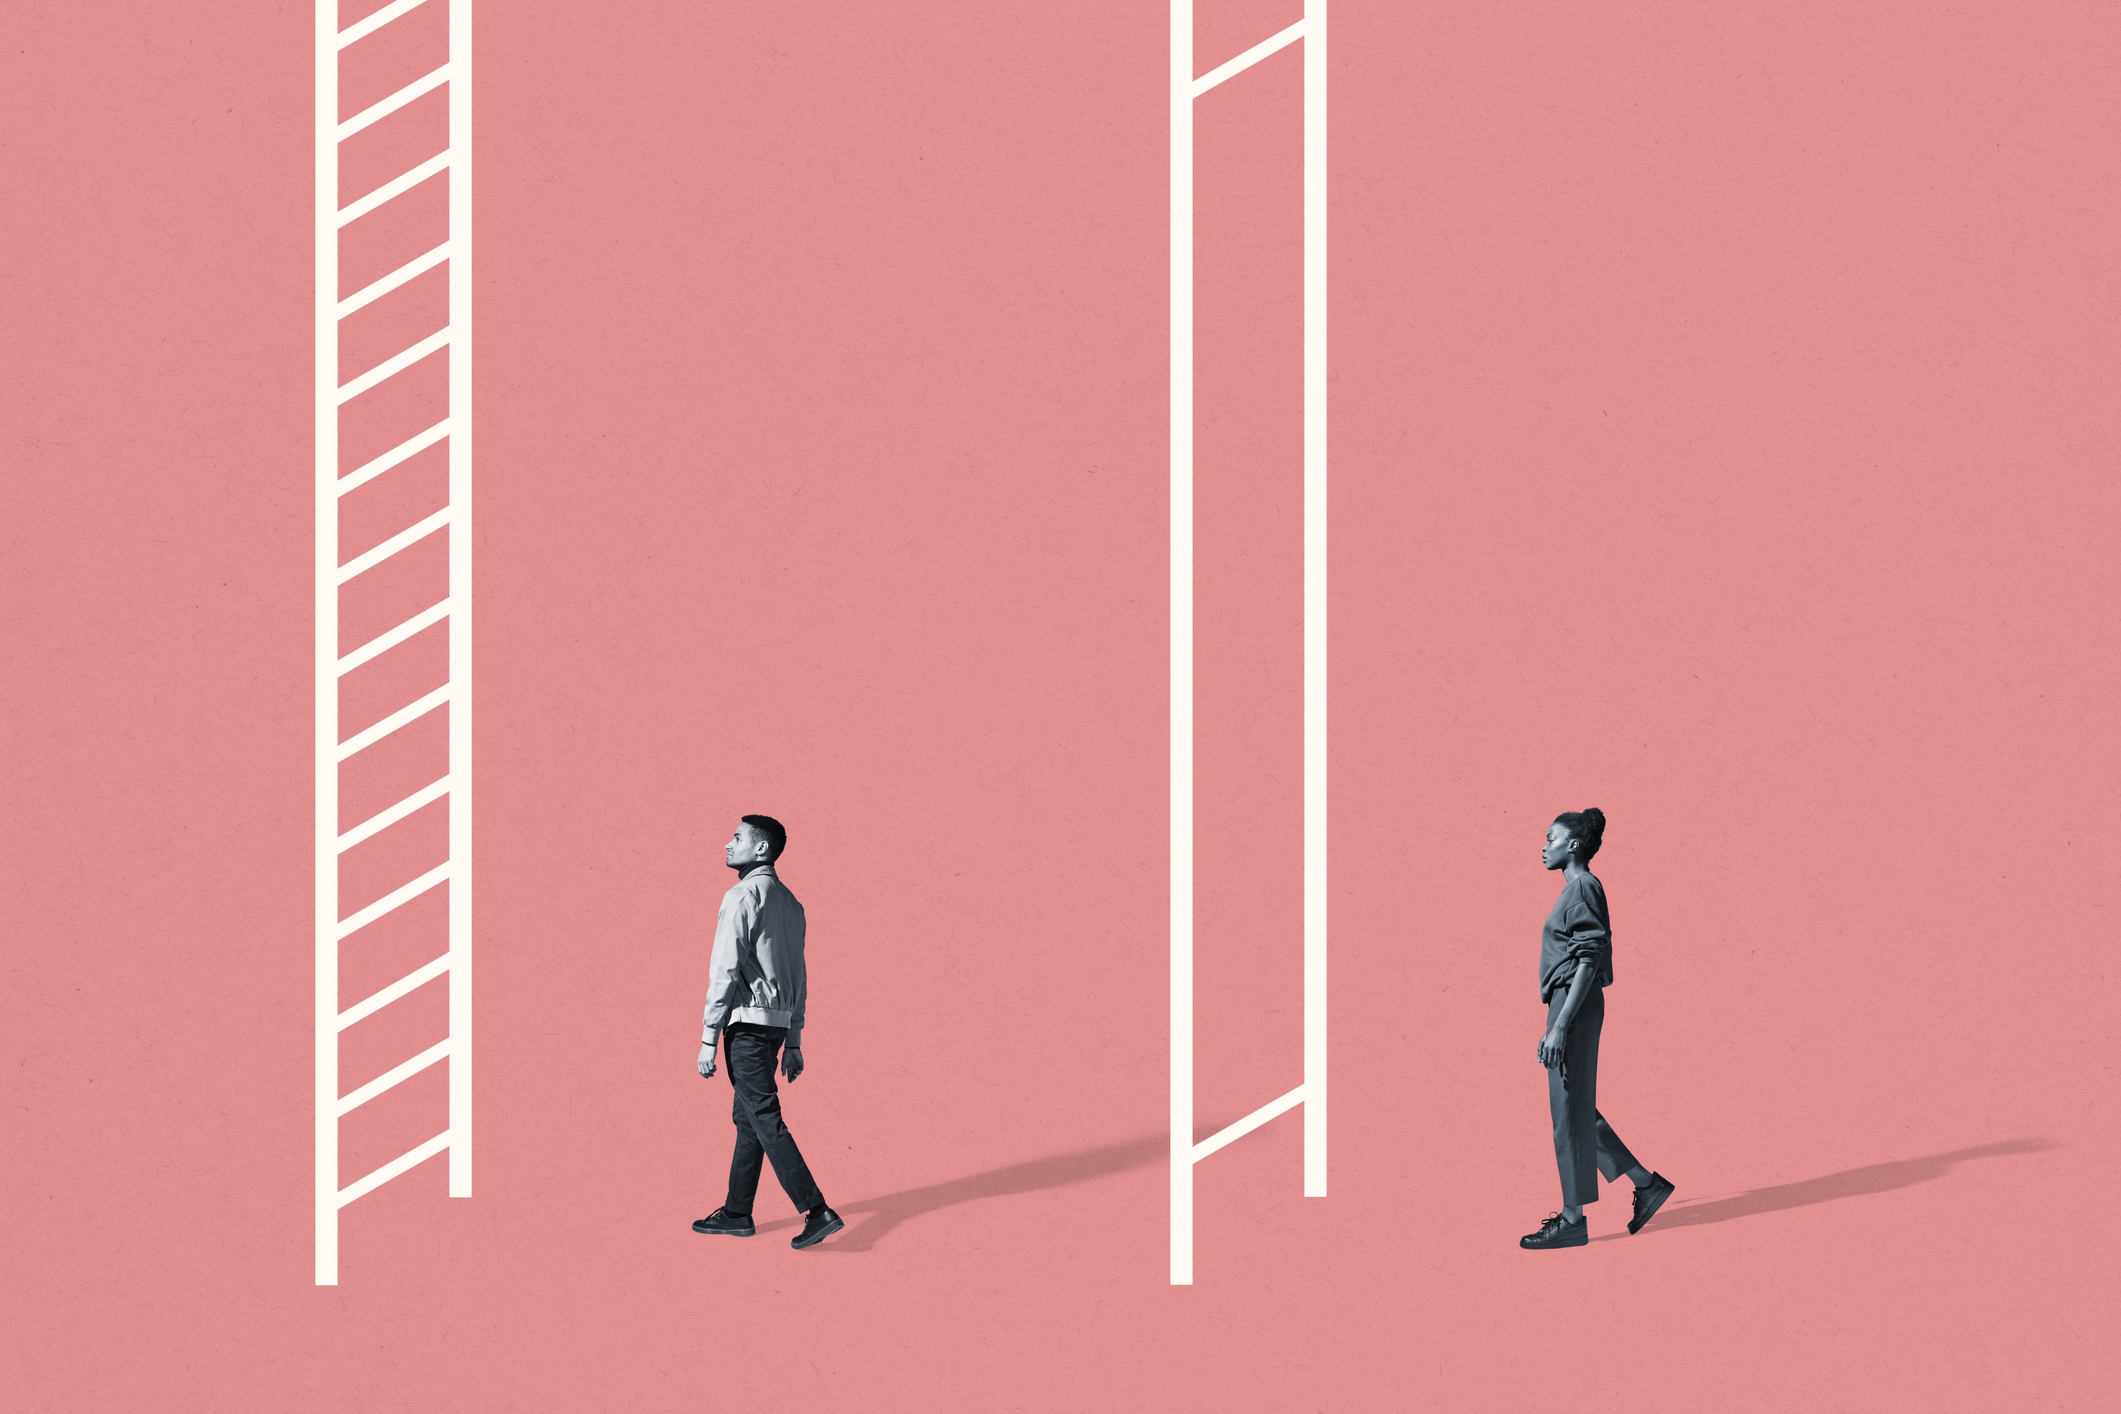 Side view of young man and woman walking towards white ladders on coral background